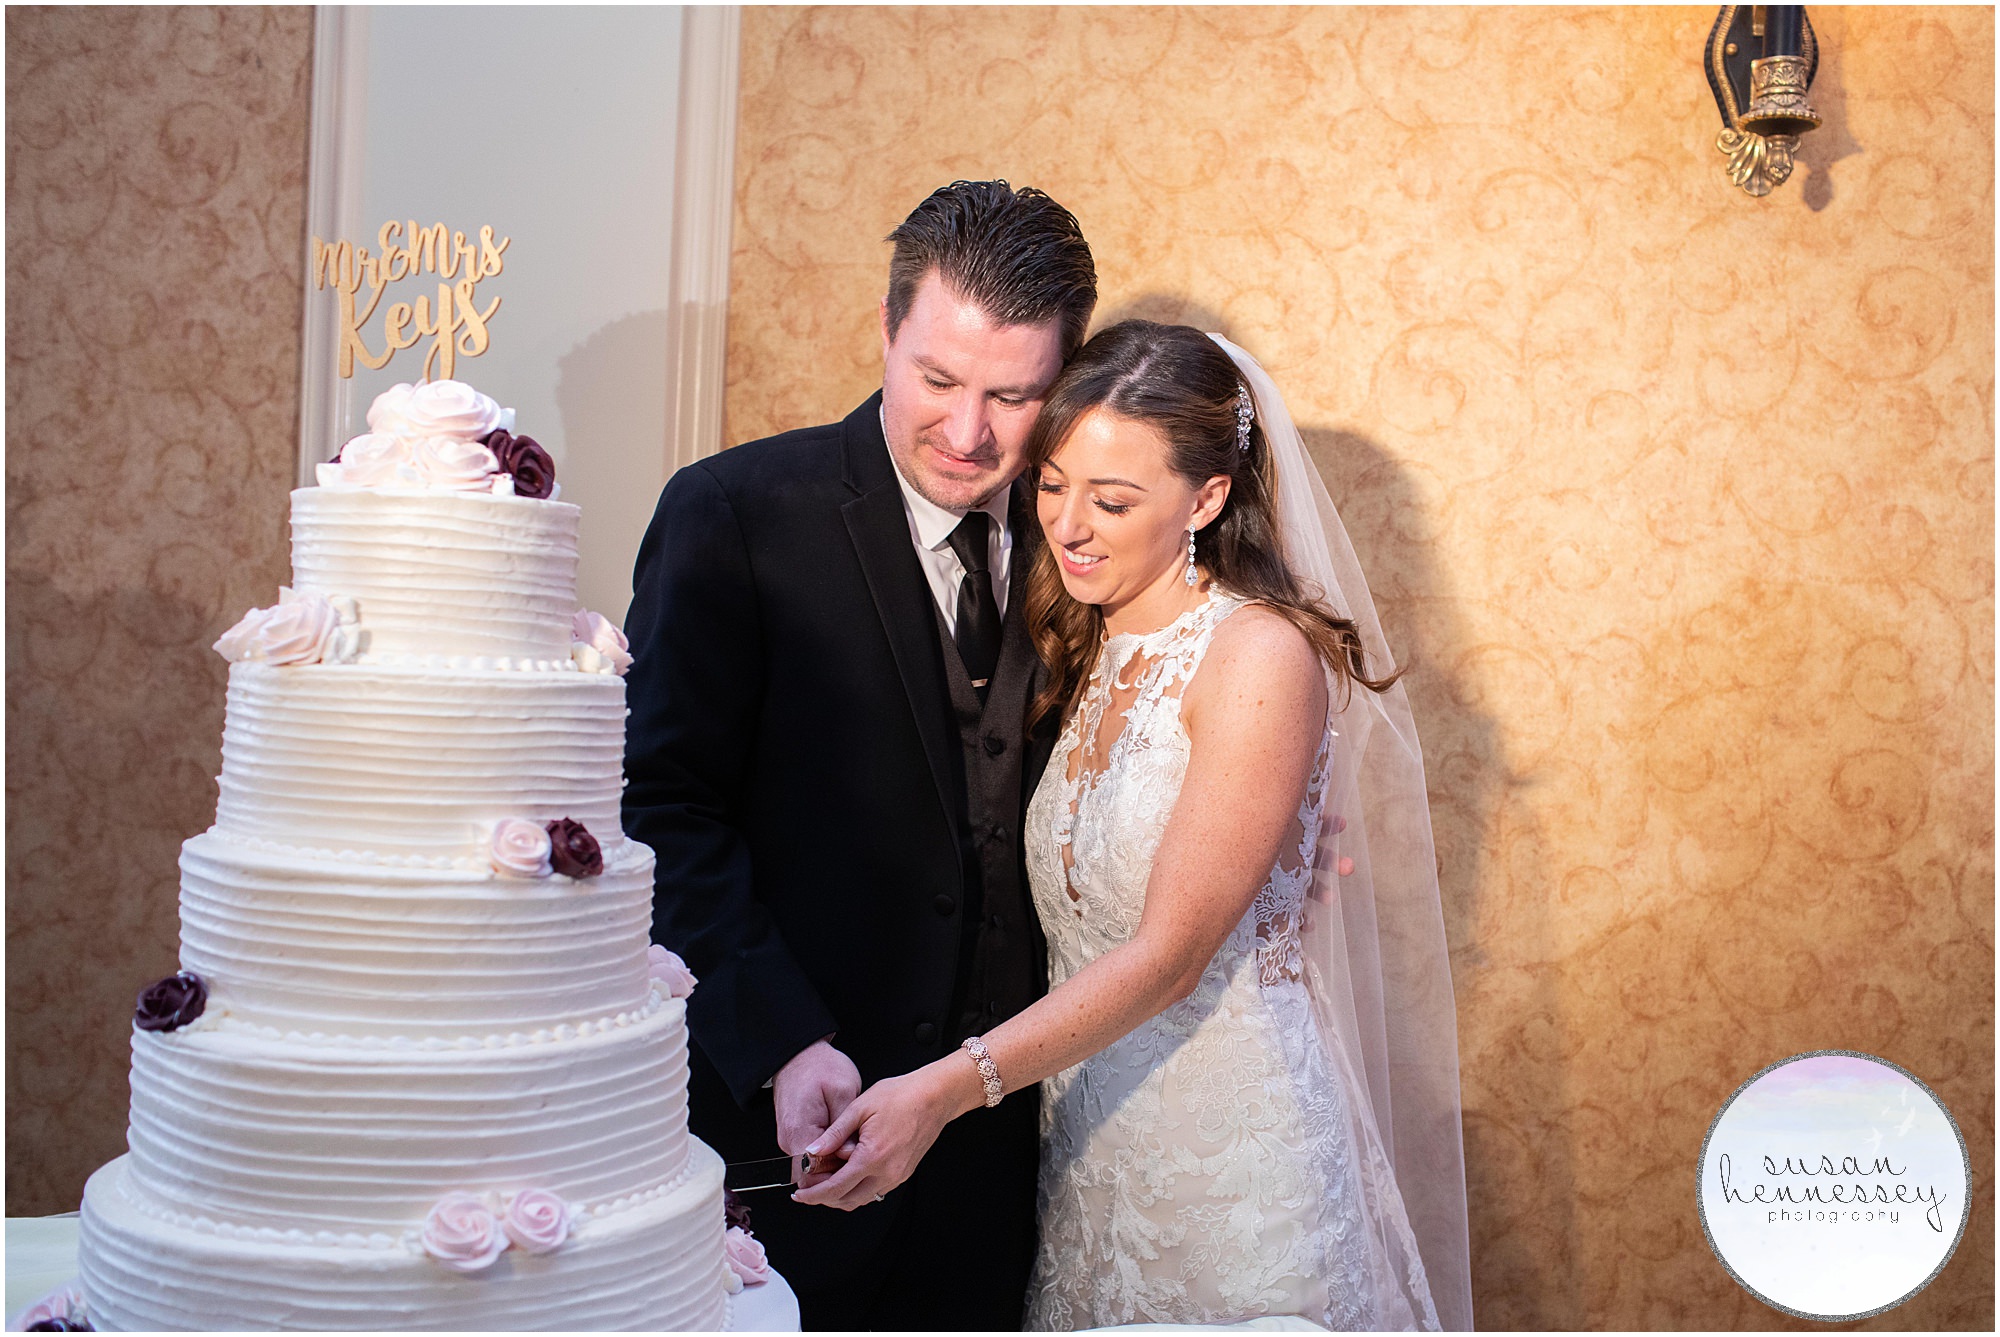 Cake cutting ceremony at the Merion wedding reception